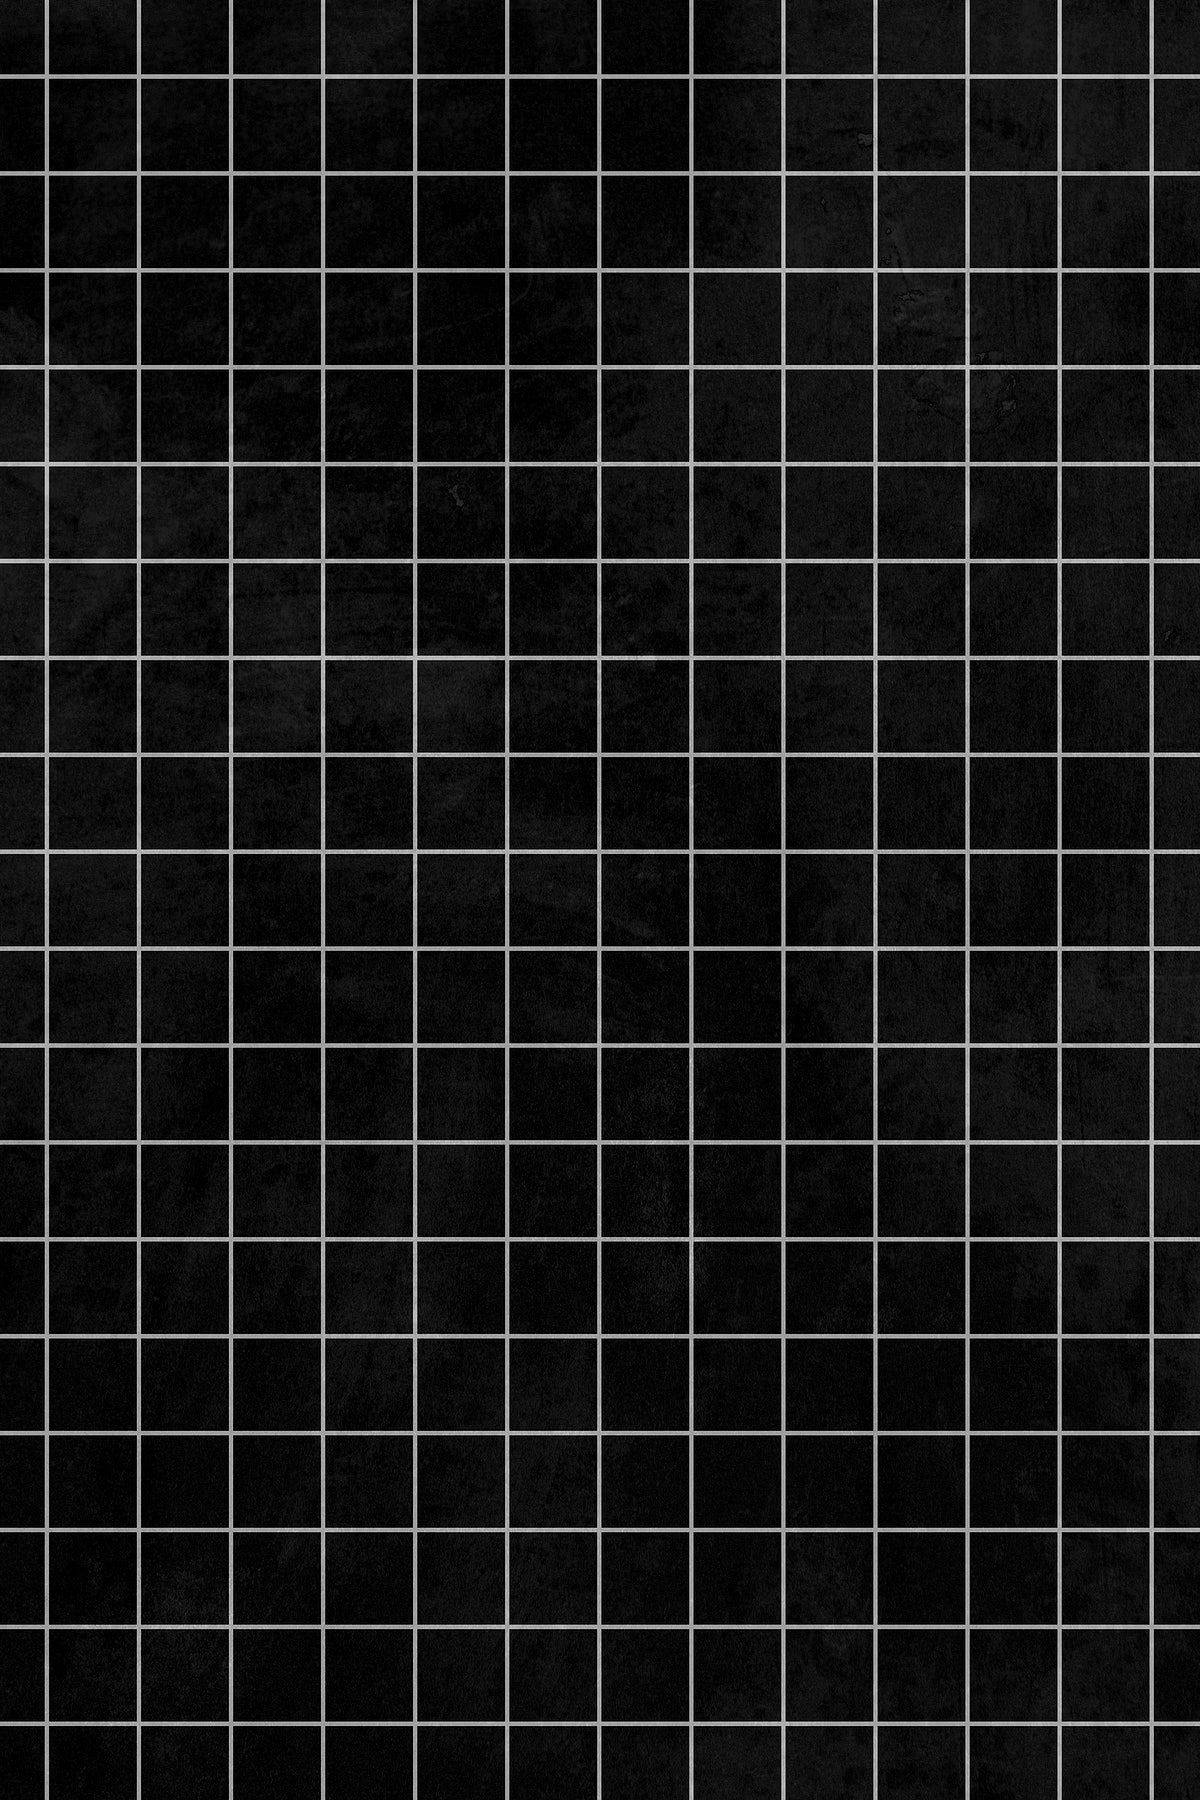 Textured Black And White Grid Aesthetic Background